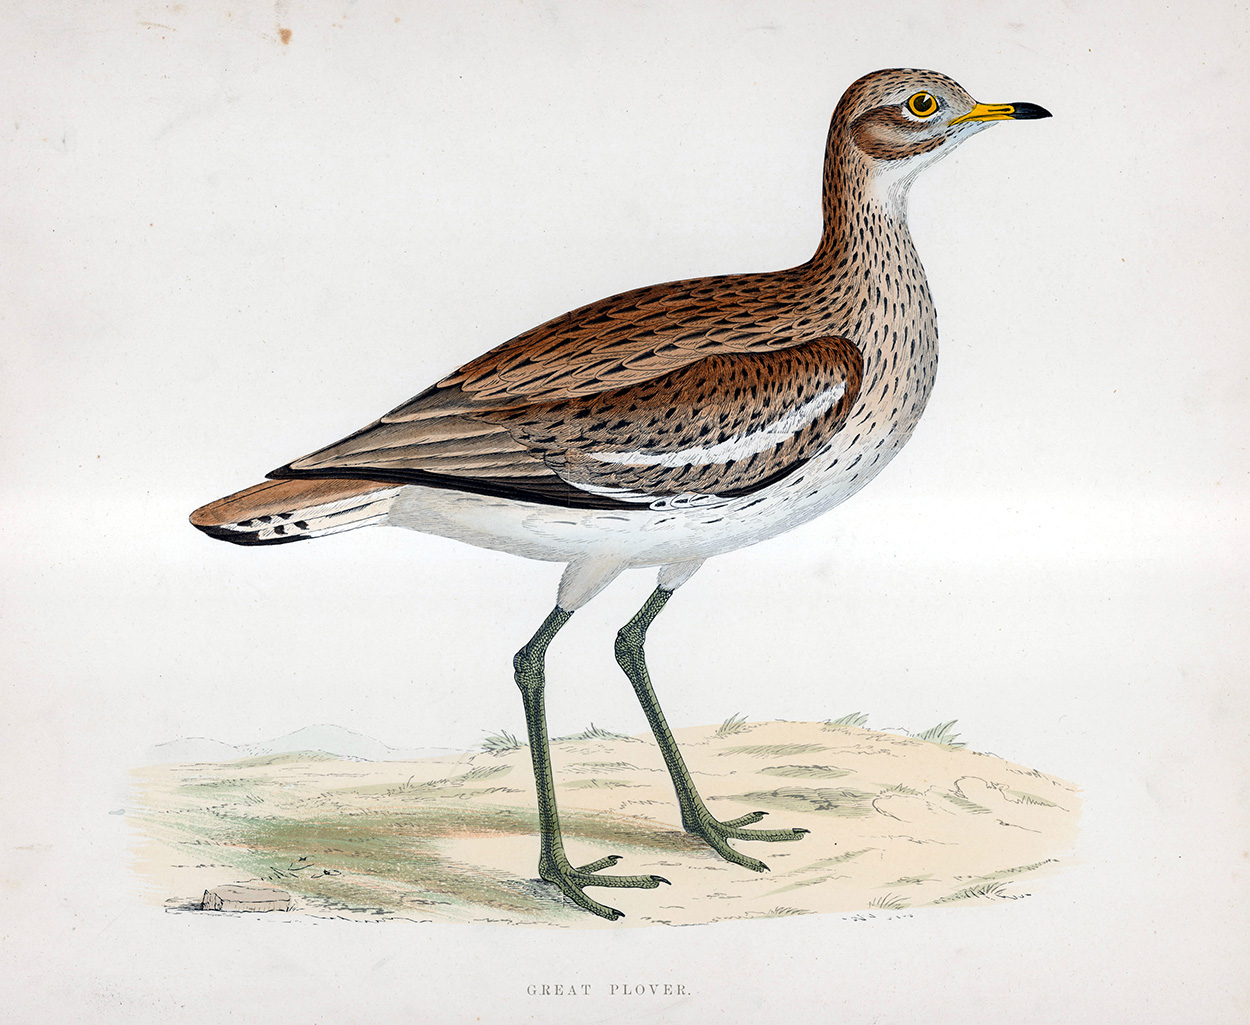 Great Plover - hand coloured lithograph 1891 (Print) art by Beverley R Morris Art at The Illustration Art Gallery